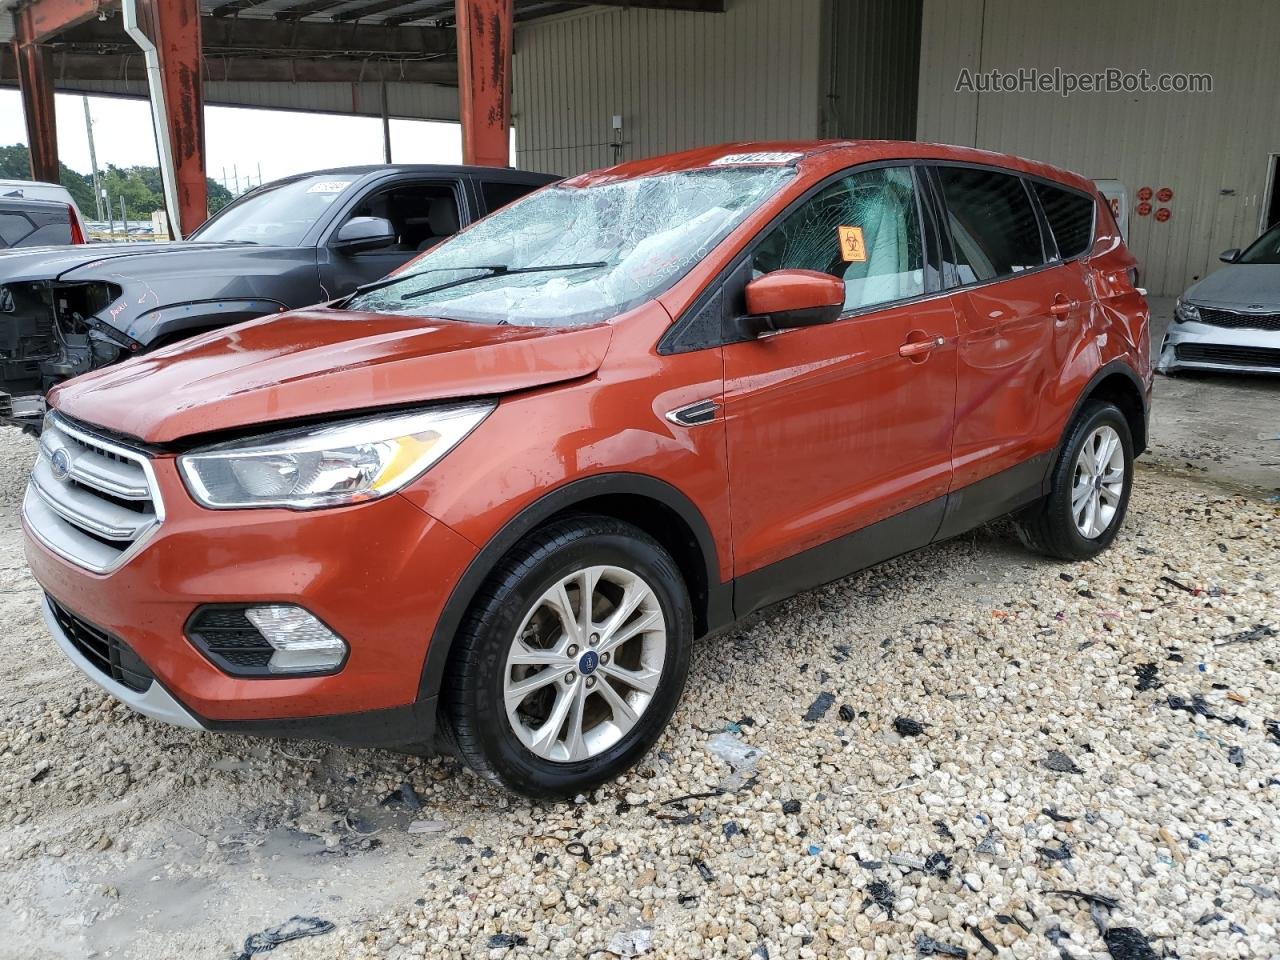 2019 Ford Escape Se Red vin: 1FMCU9GD7KUB56090